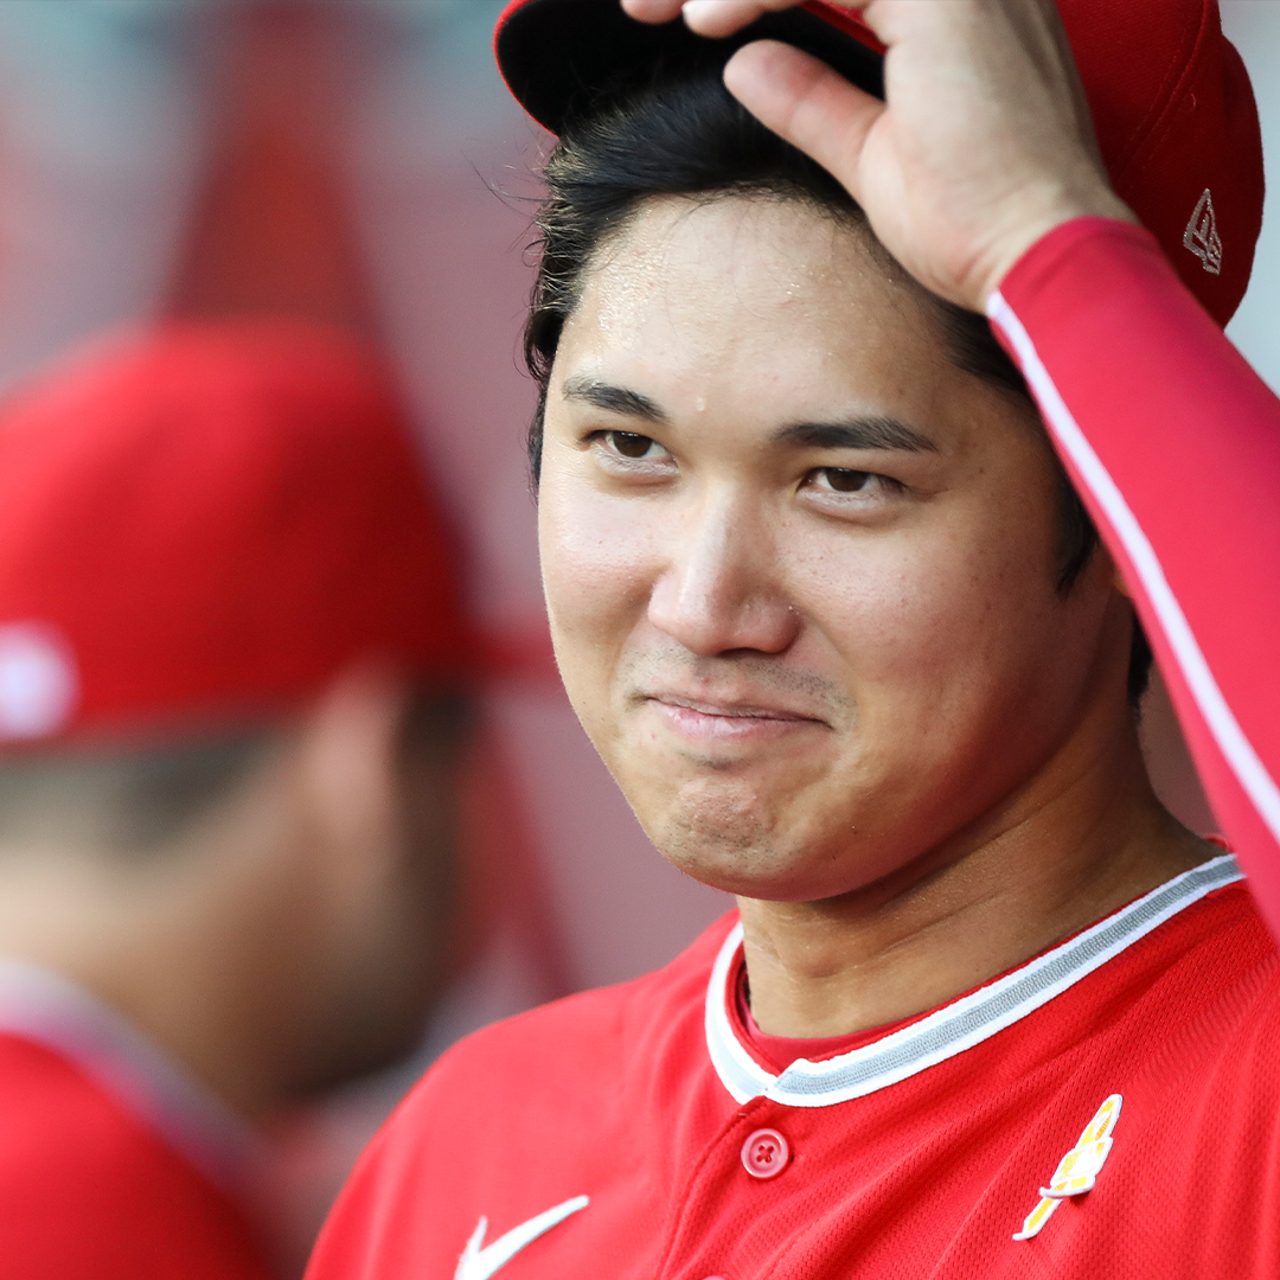 Shohei Ohtani autographs ball Kody Clemens struck him out with